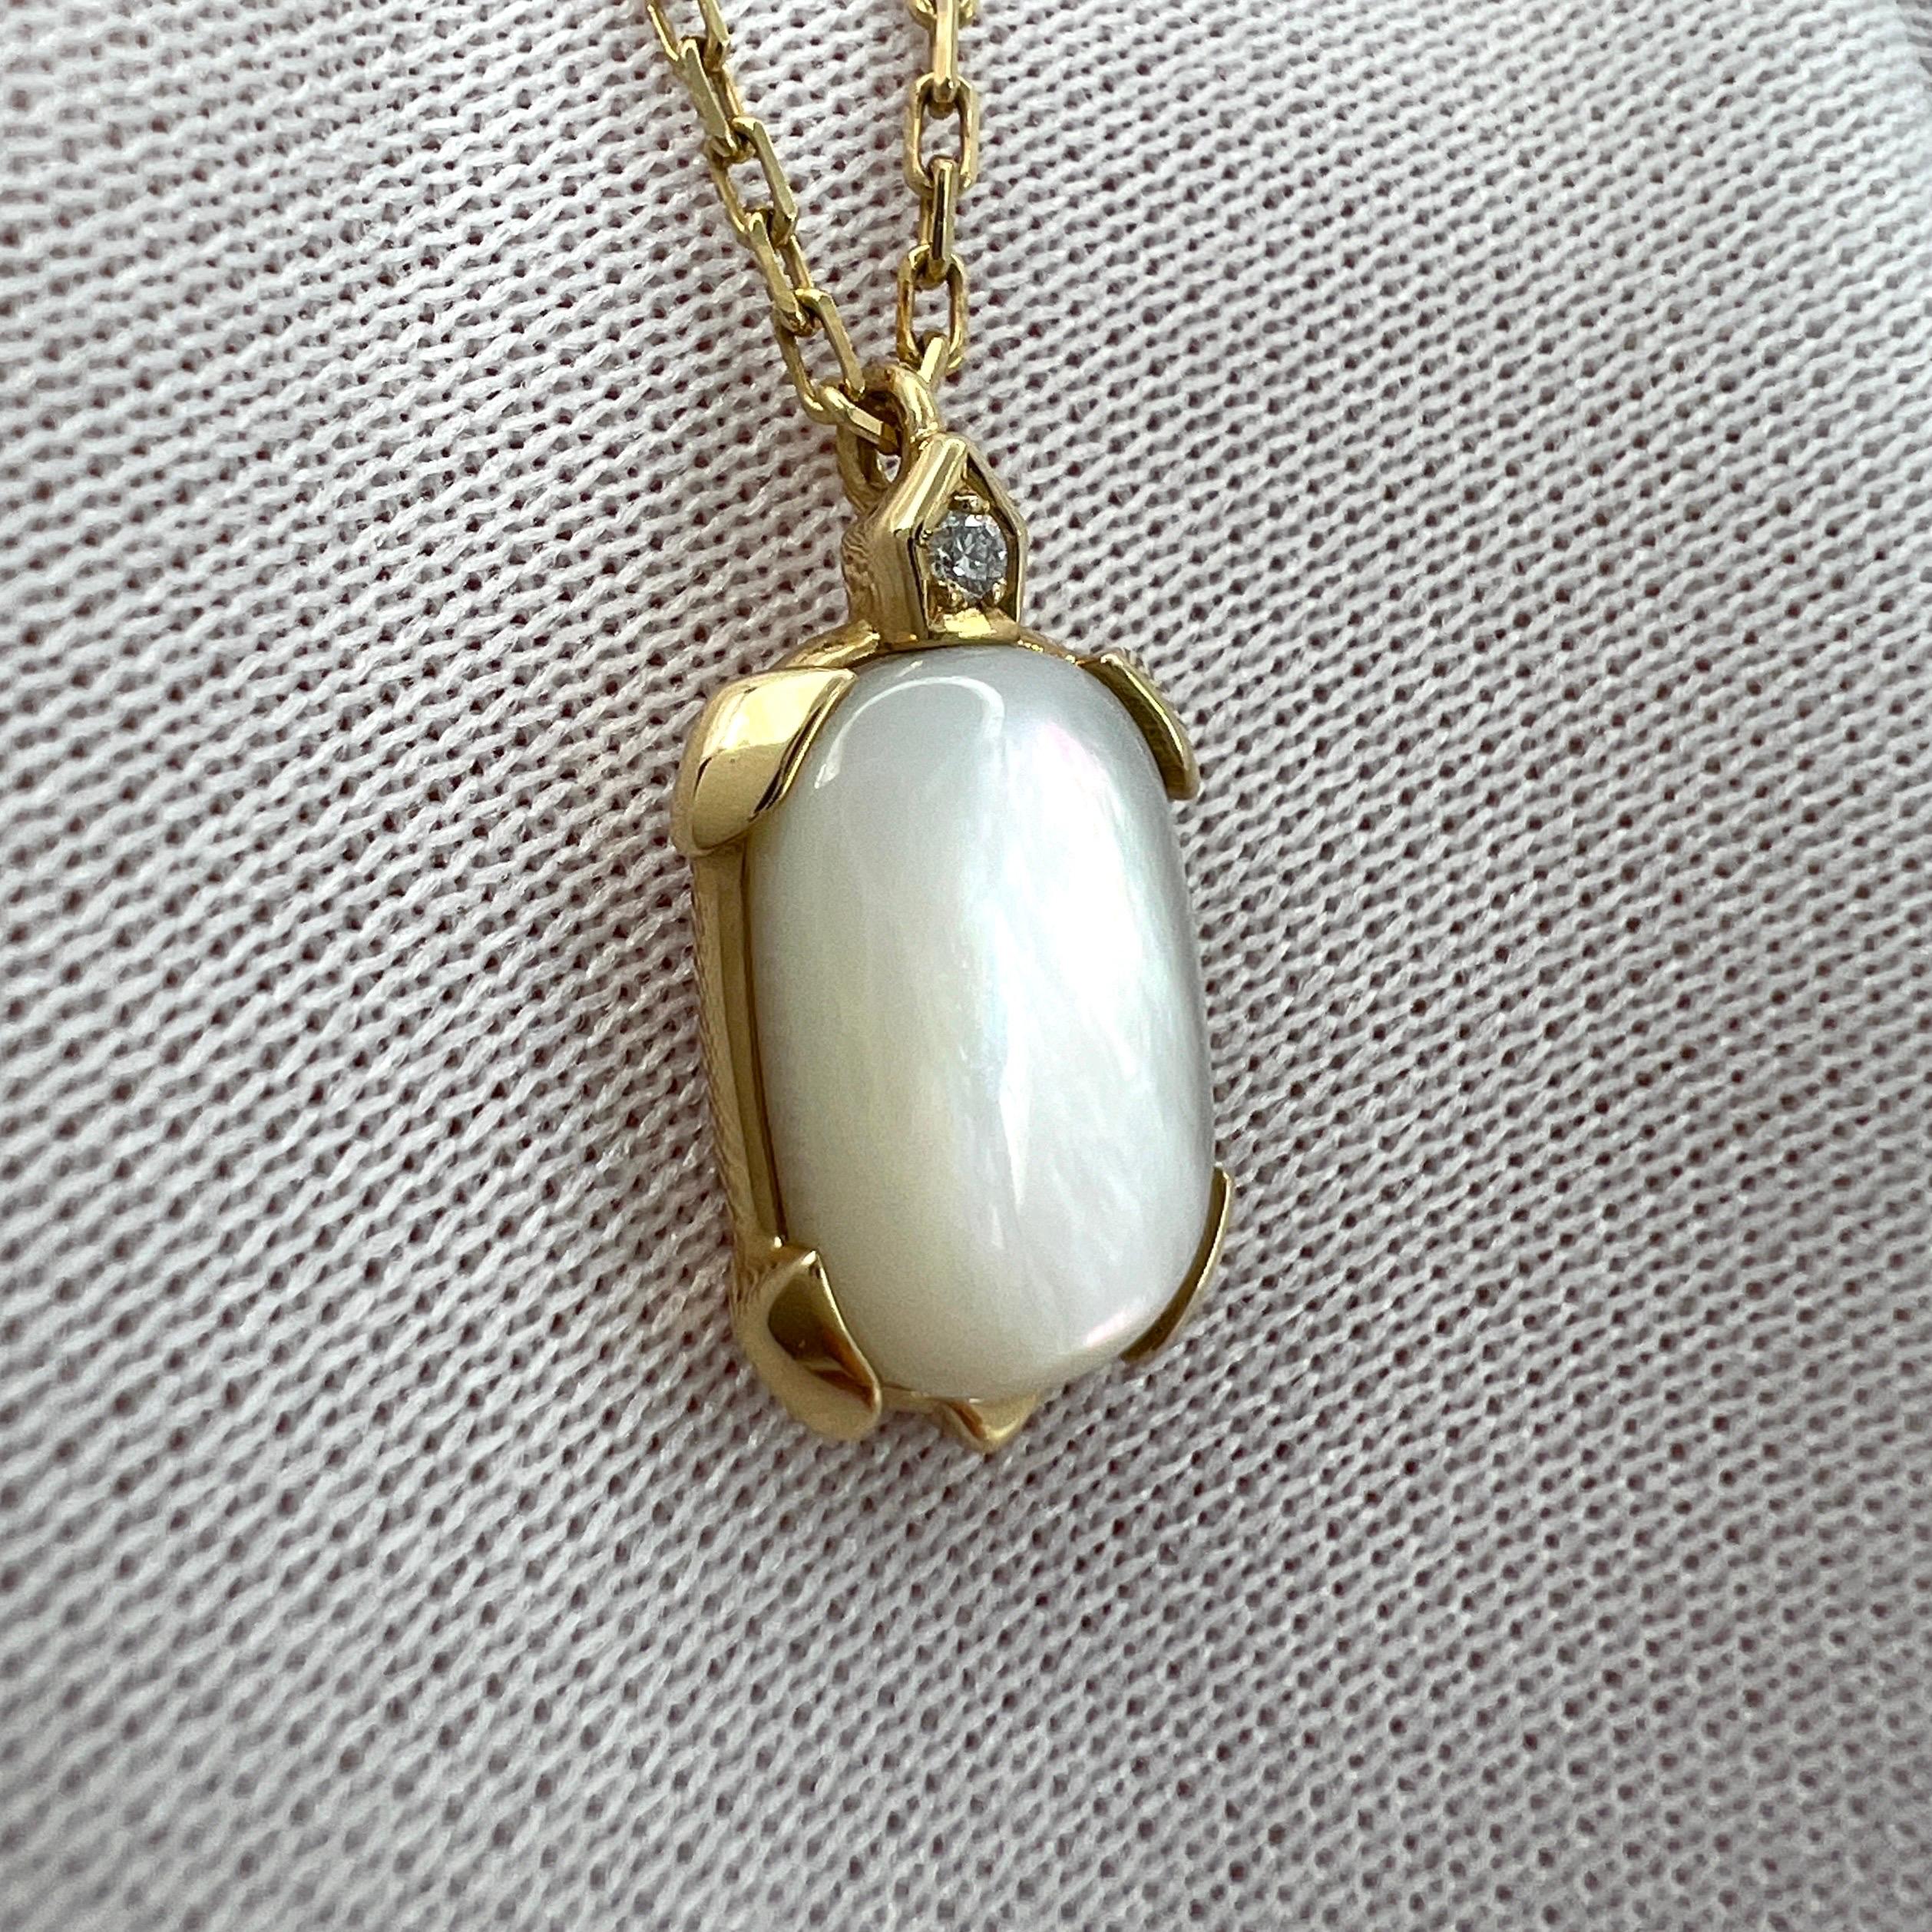 Rare Cartier Tortue Mother of Pearl & Diamond 18k Yellow Gold Pendant Necklace For Sale 7